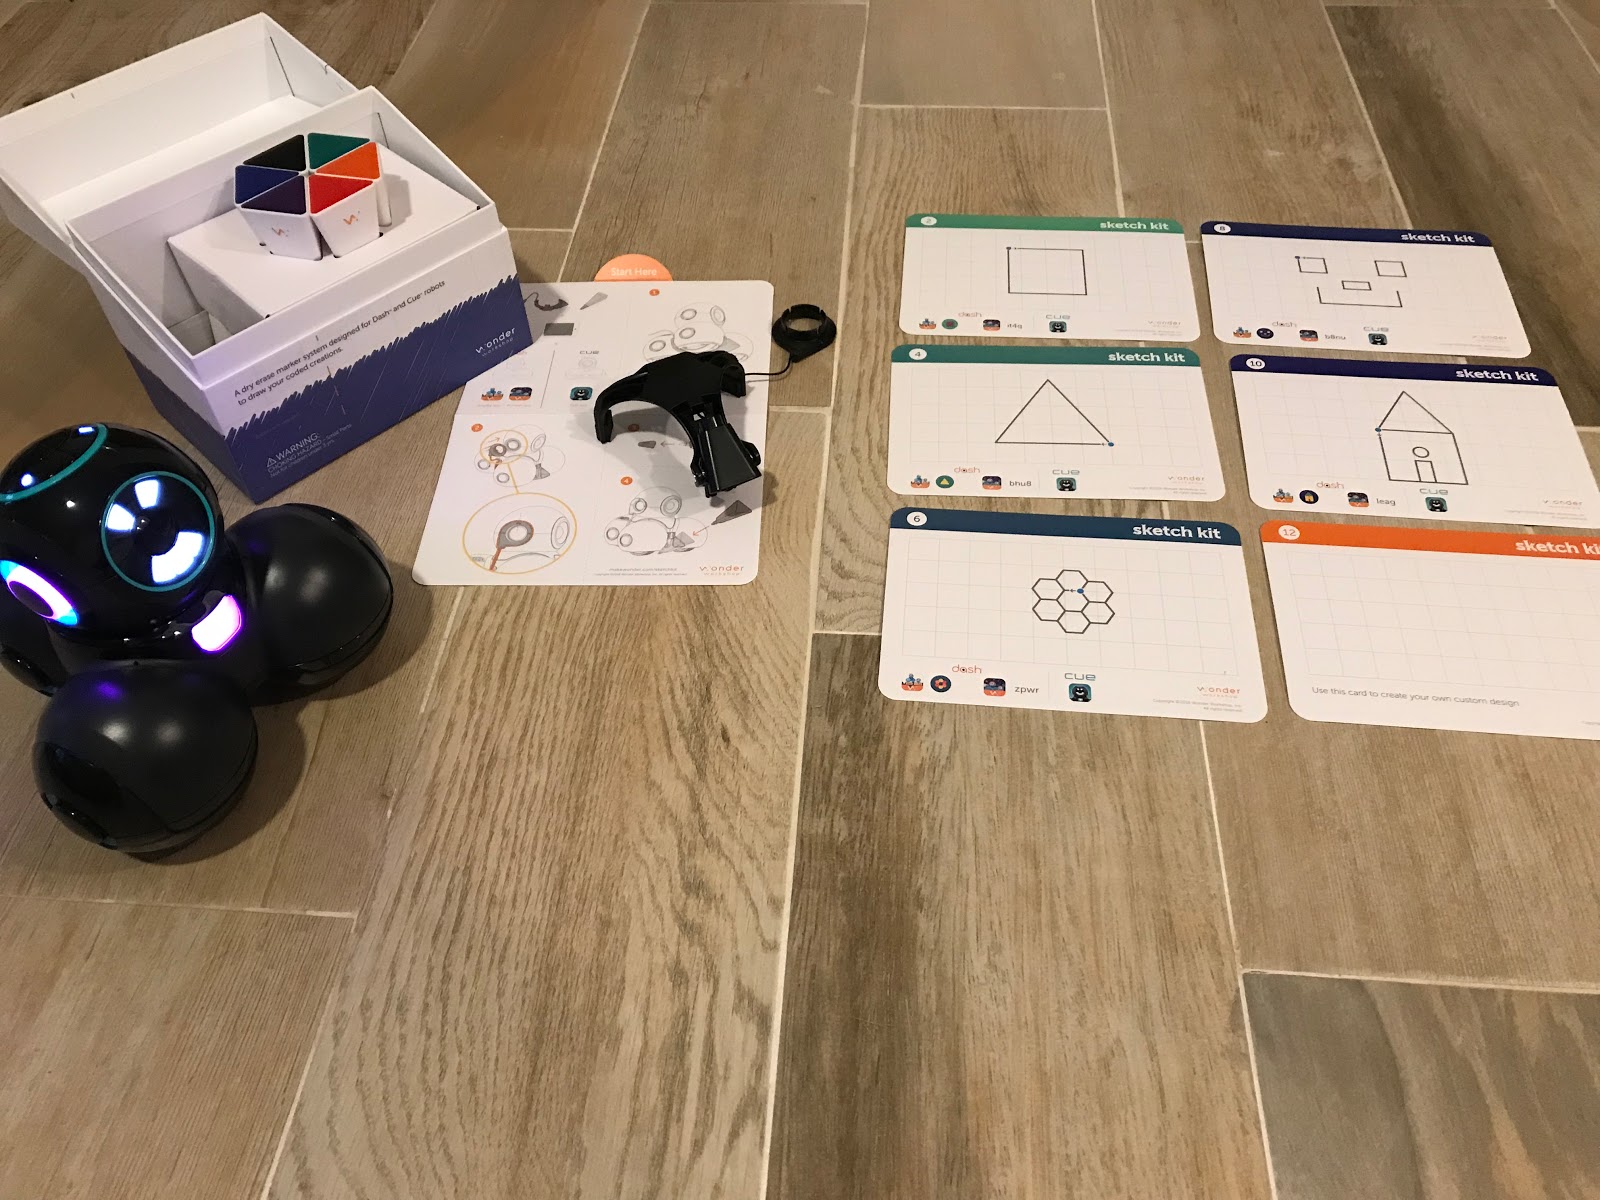 Coding and Sketching with Cue the Robot